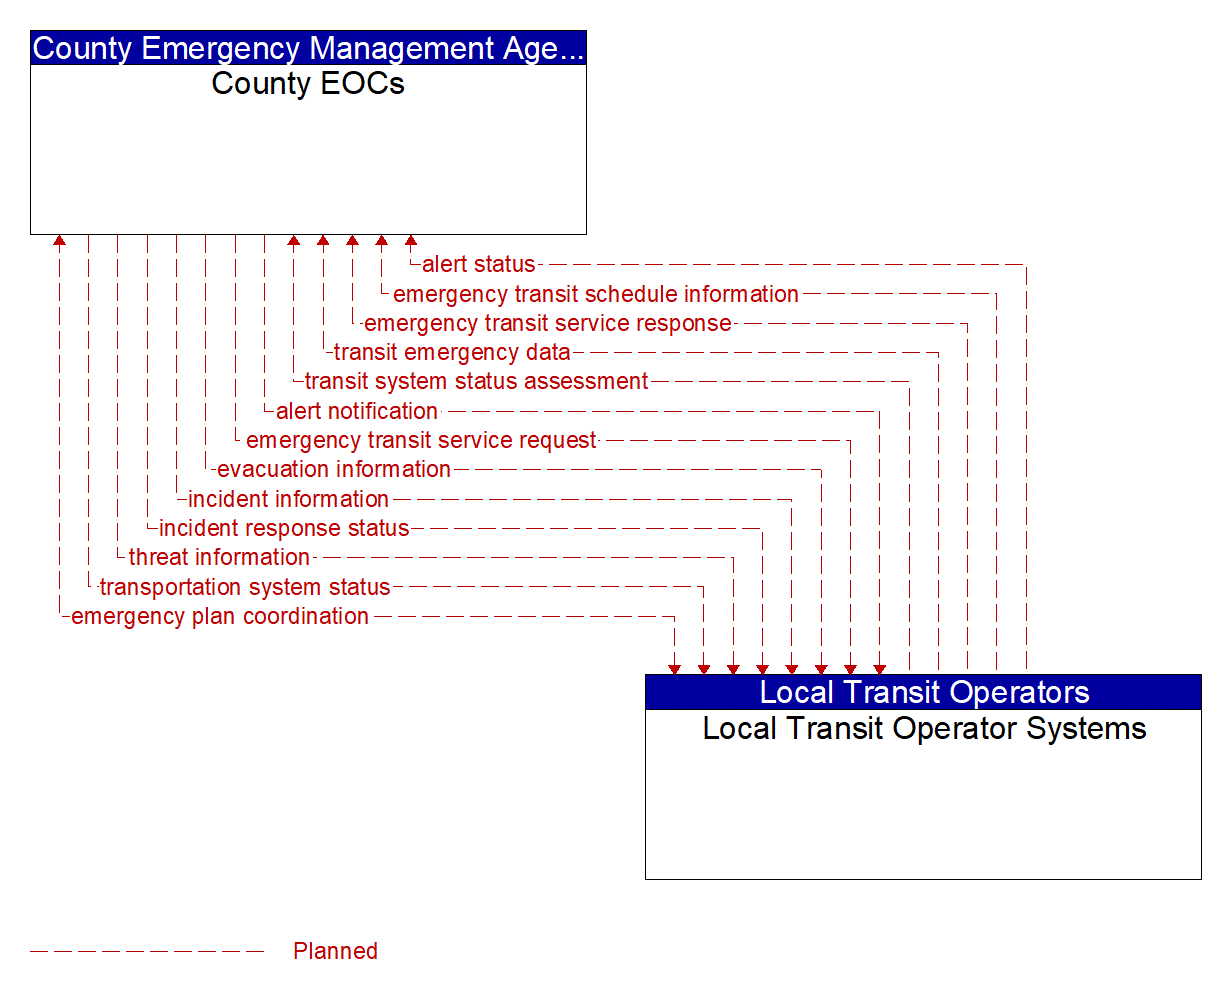 Architecture Flow Diagram: Local Transit Operator Systems <--> County EOCs